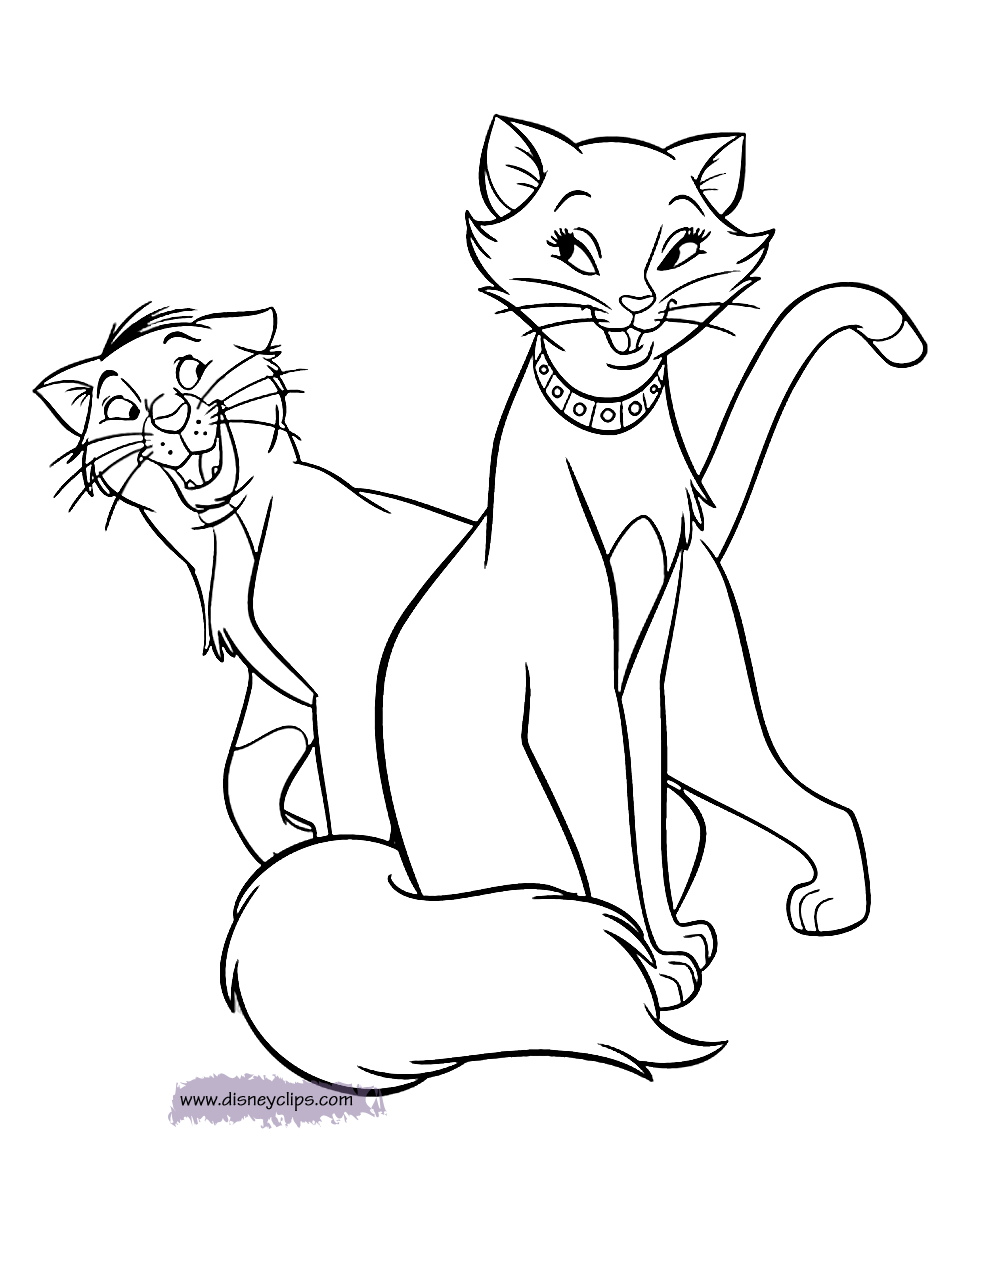 aristocats-coloring-pages-printable